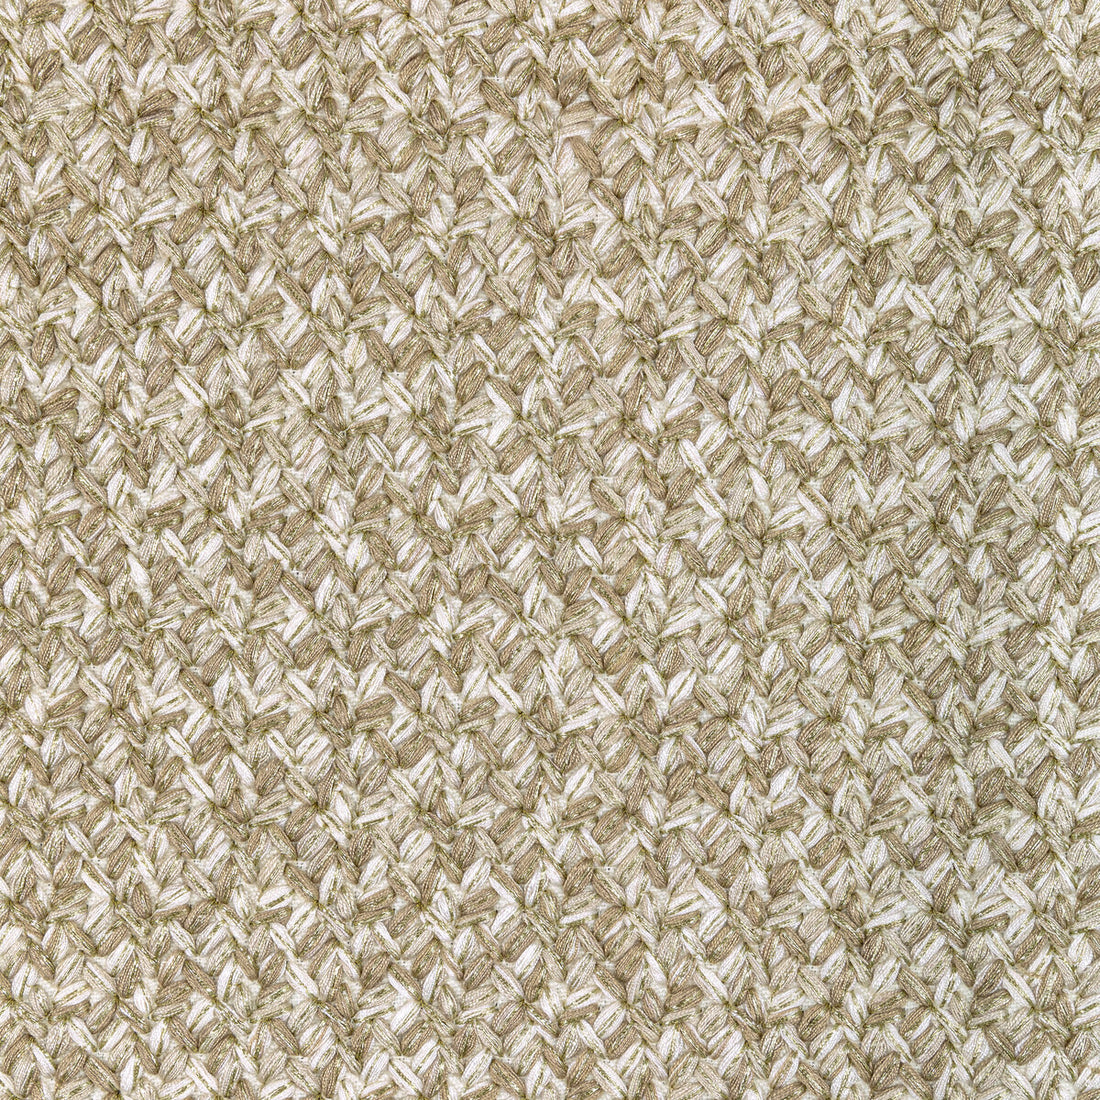 Gilded Lacing fabric in burnished color - pattern 36314.4.0 - by Kravet Couture in the Modern Luxe III collection